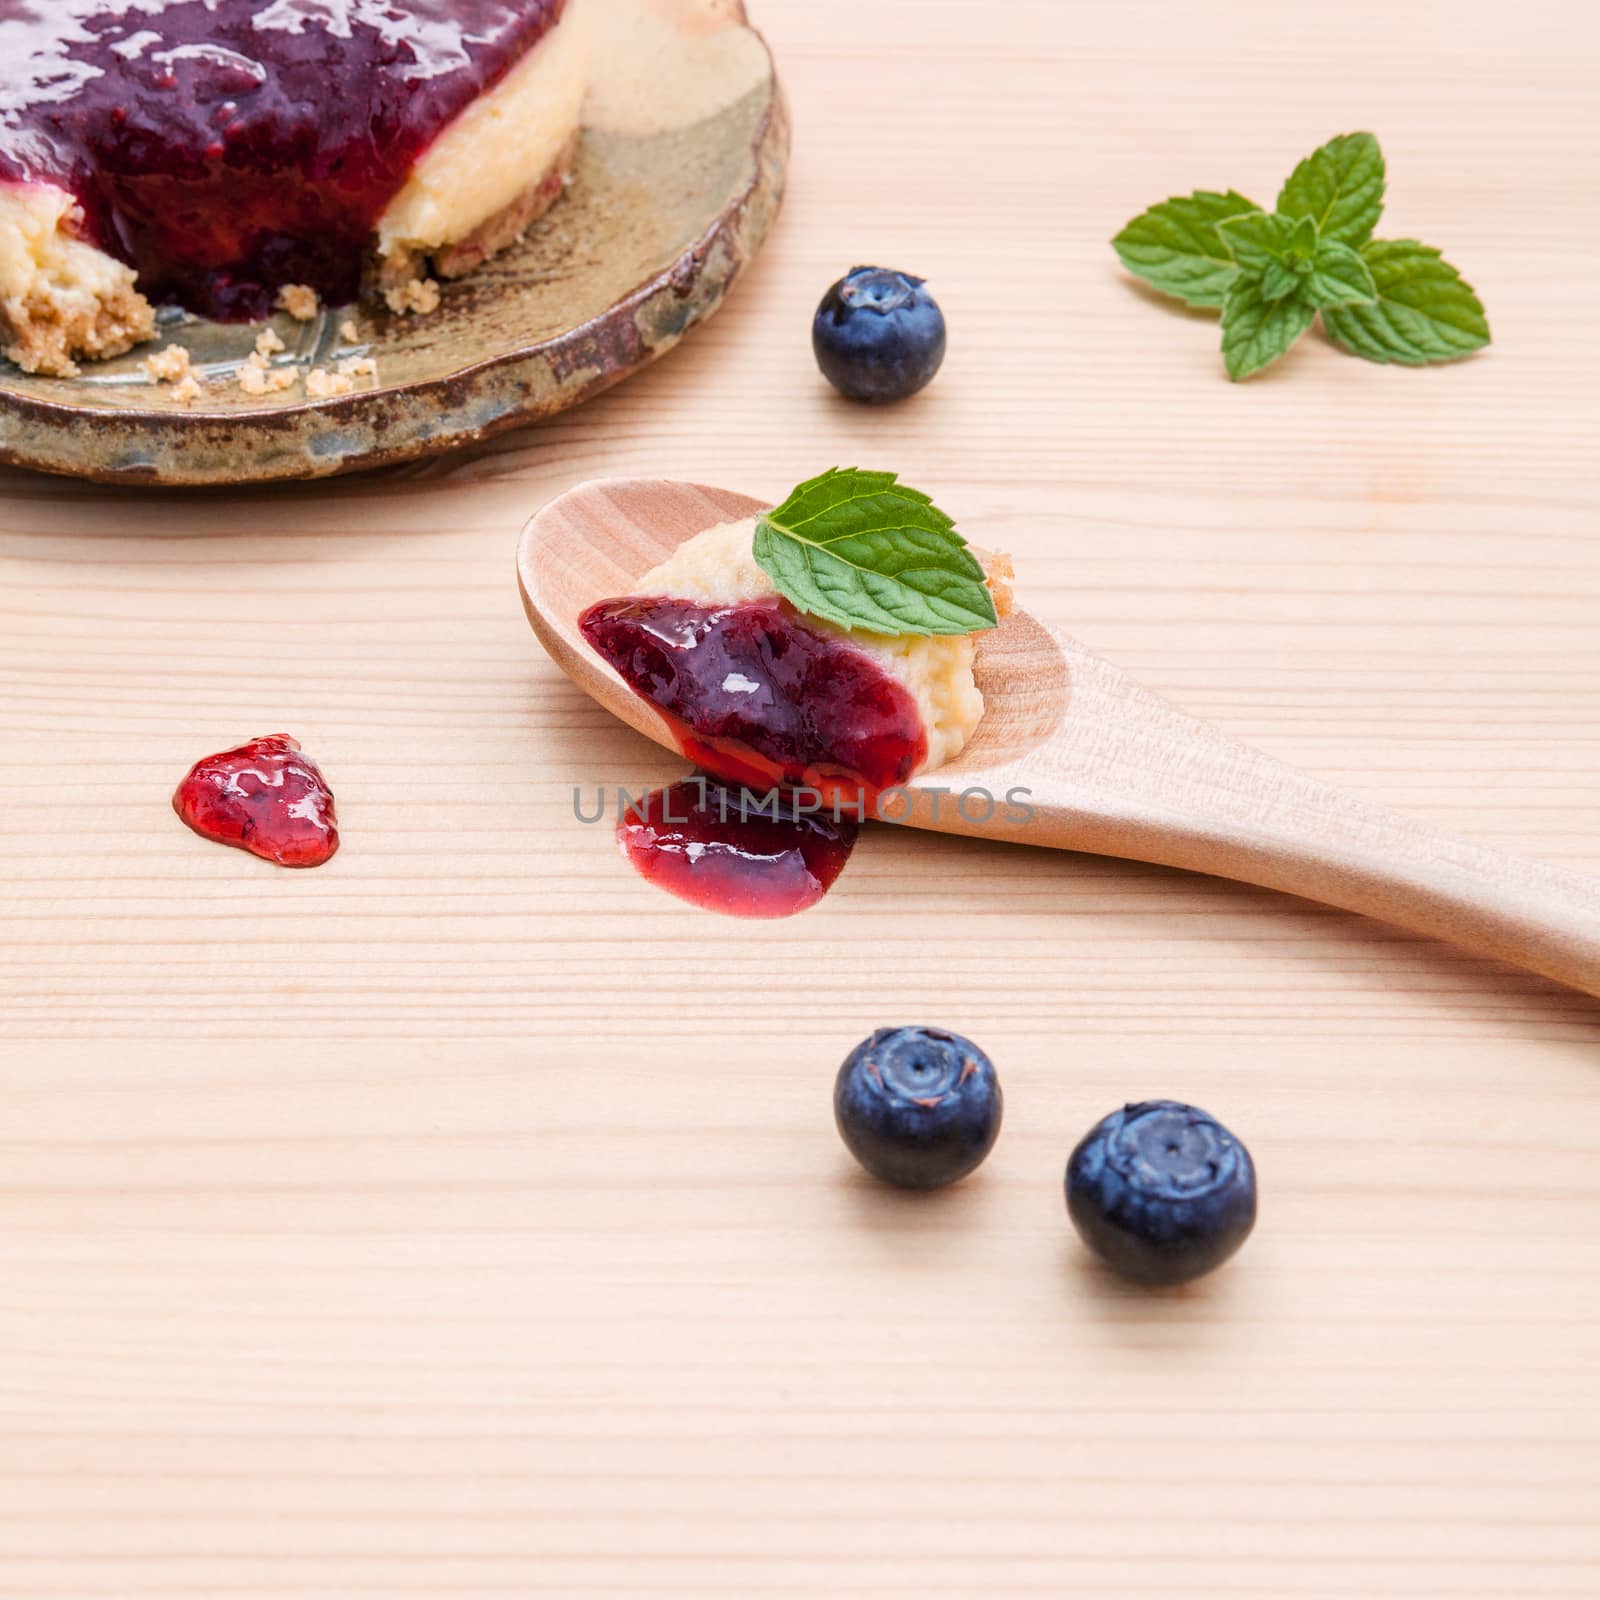 Blueberry cheesecake with fresh mint leaves on wooden background by kerdkanno